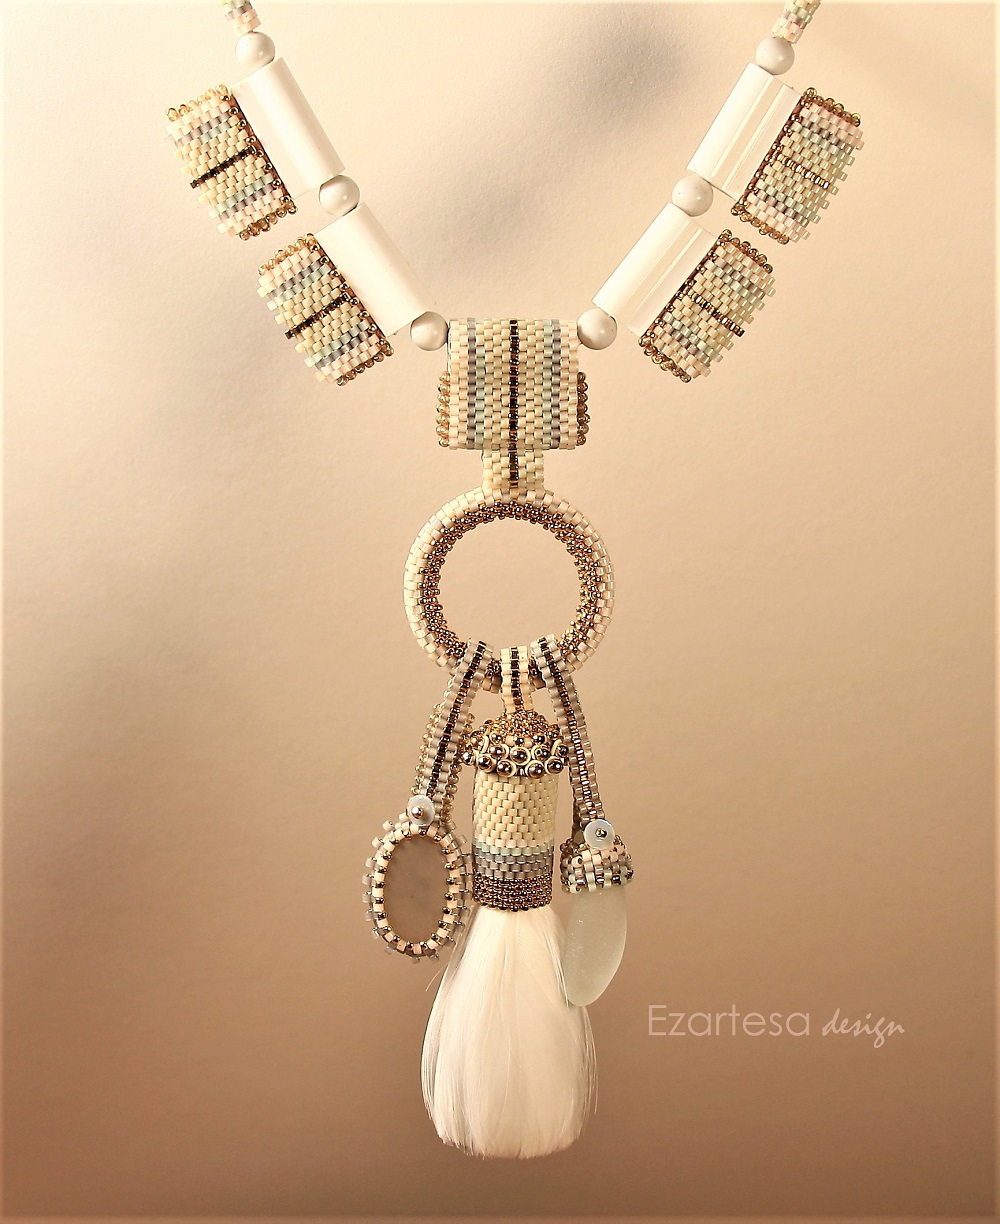 White Feather, Beach Stone and Sea Glass Beaded Necklace by Ezartesa.